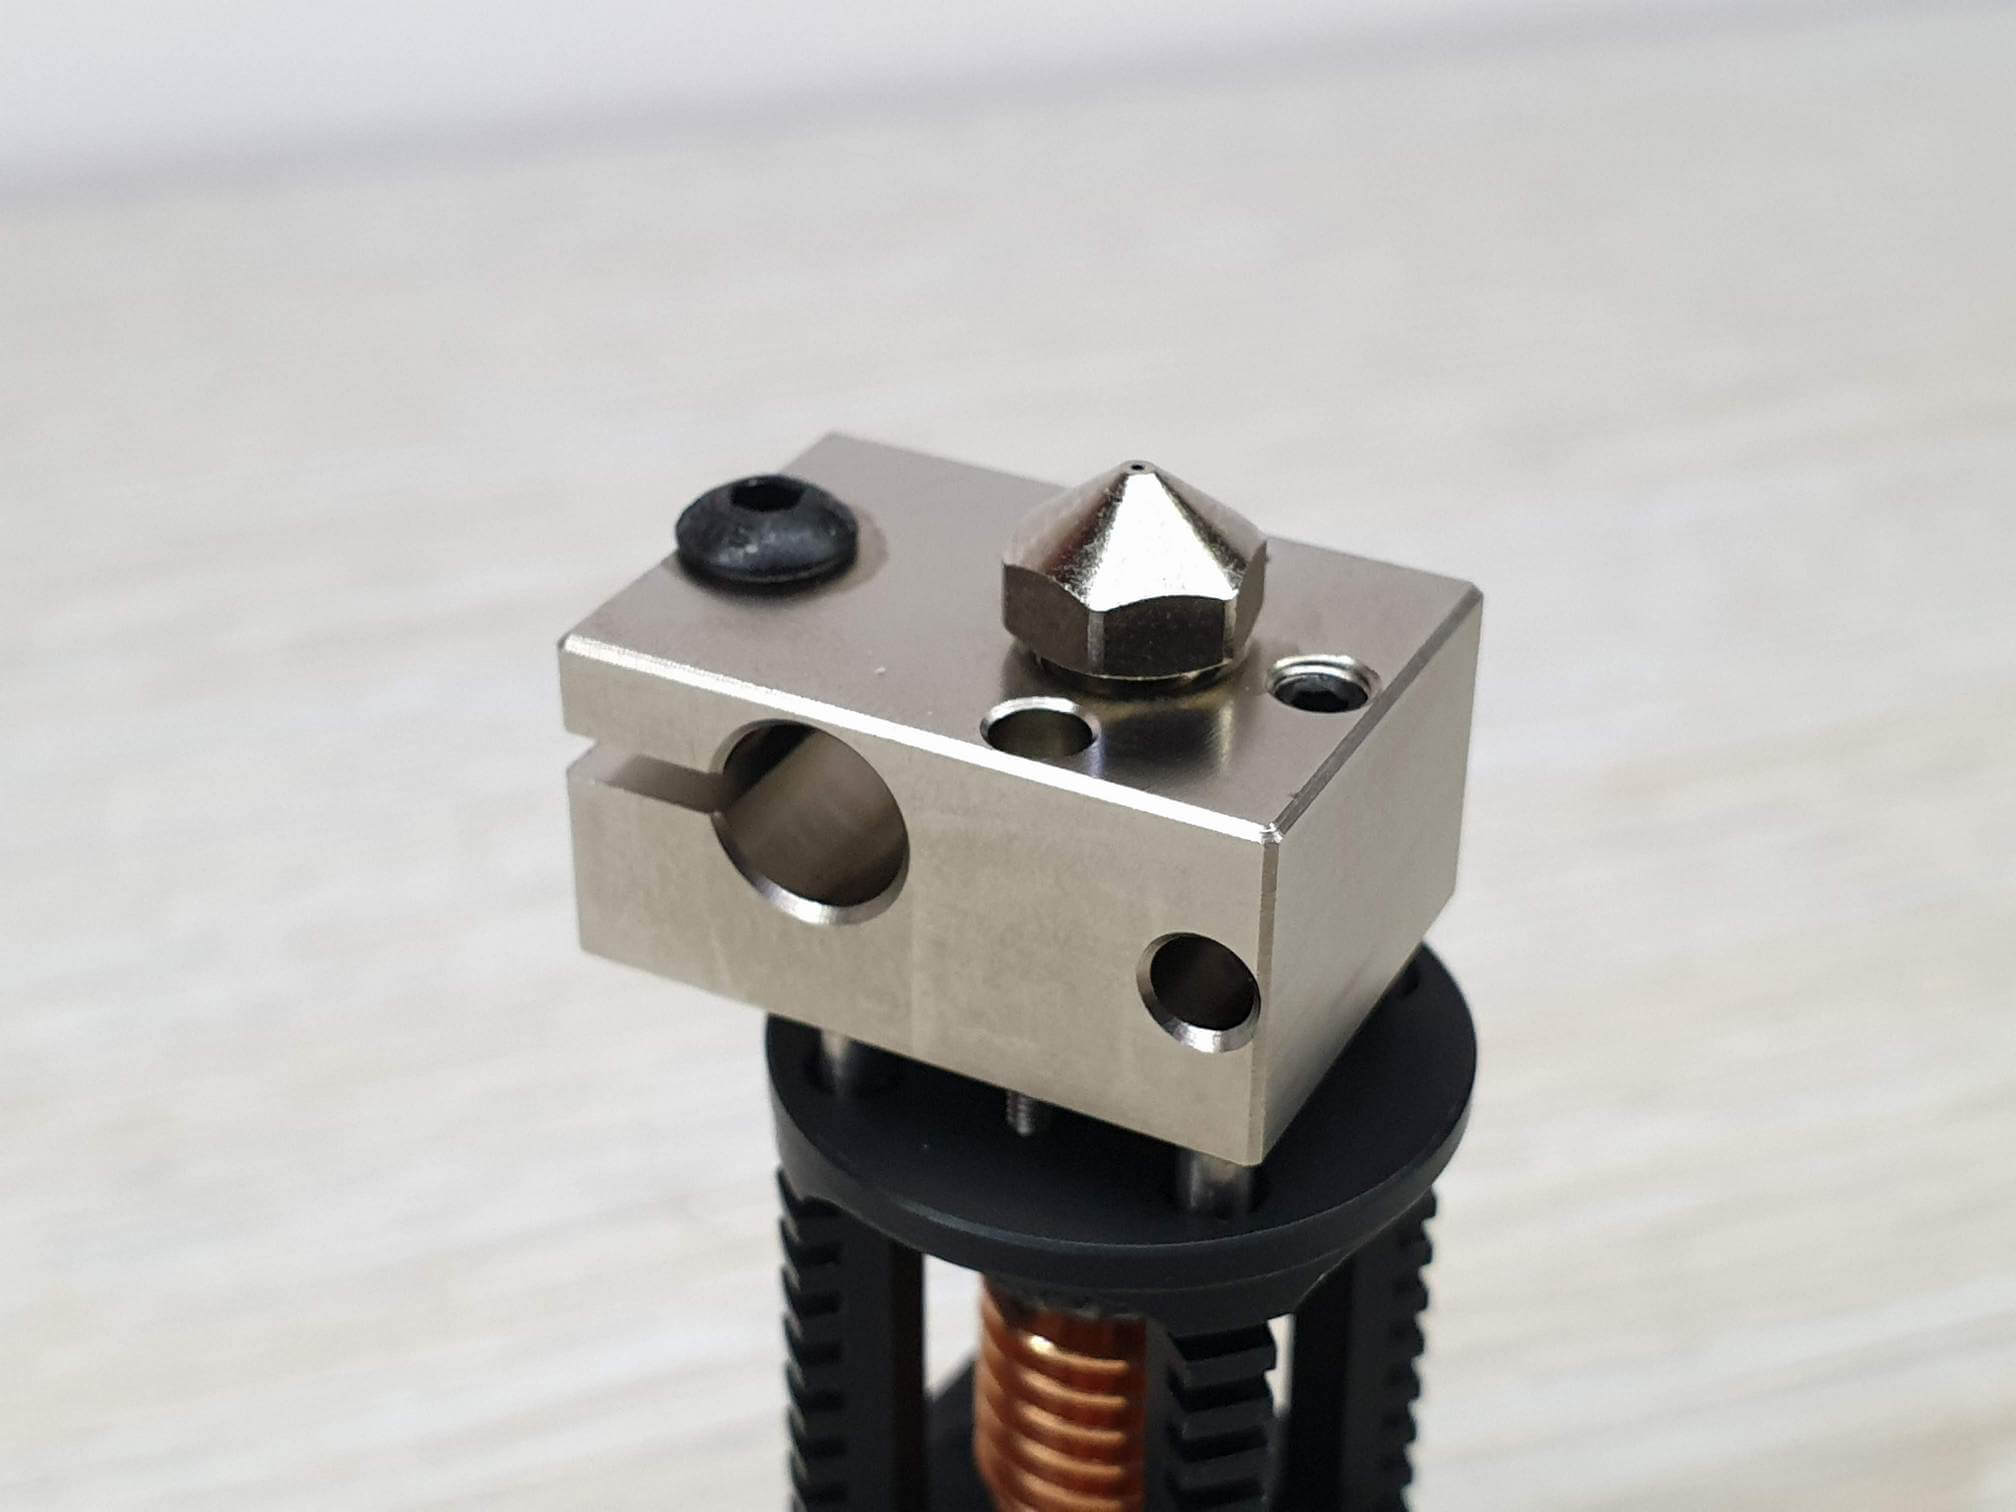 Triangle Labs Dragon Hotend Review – Maker Hacks